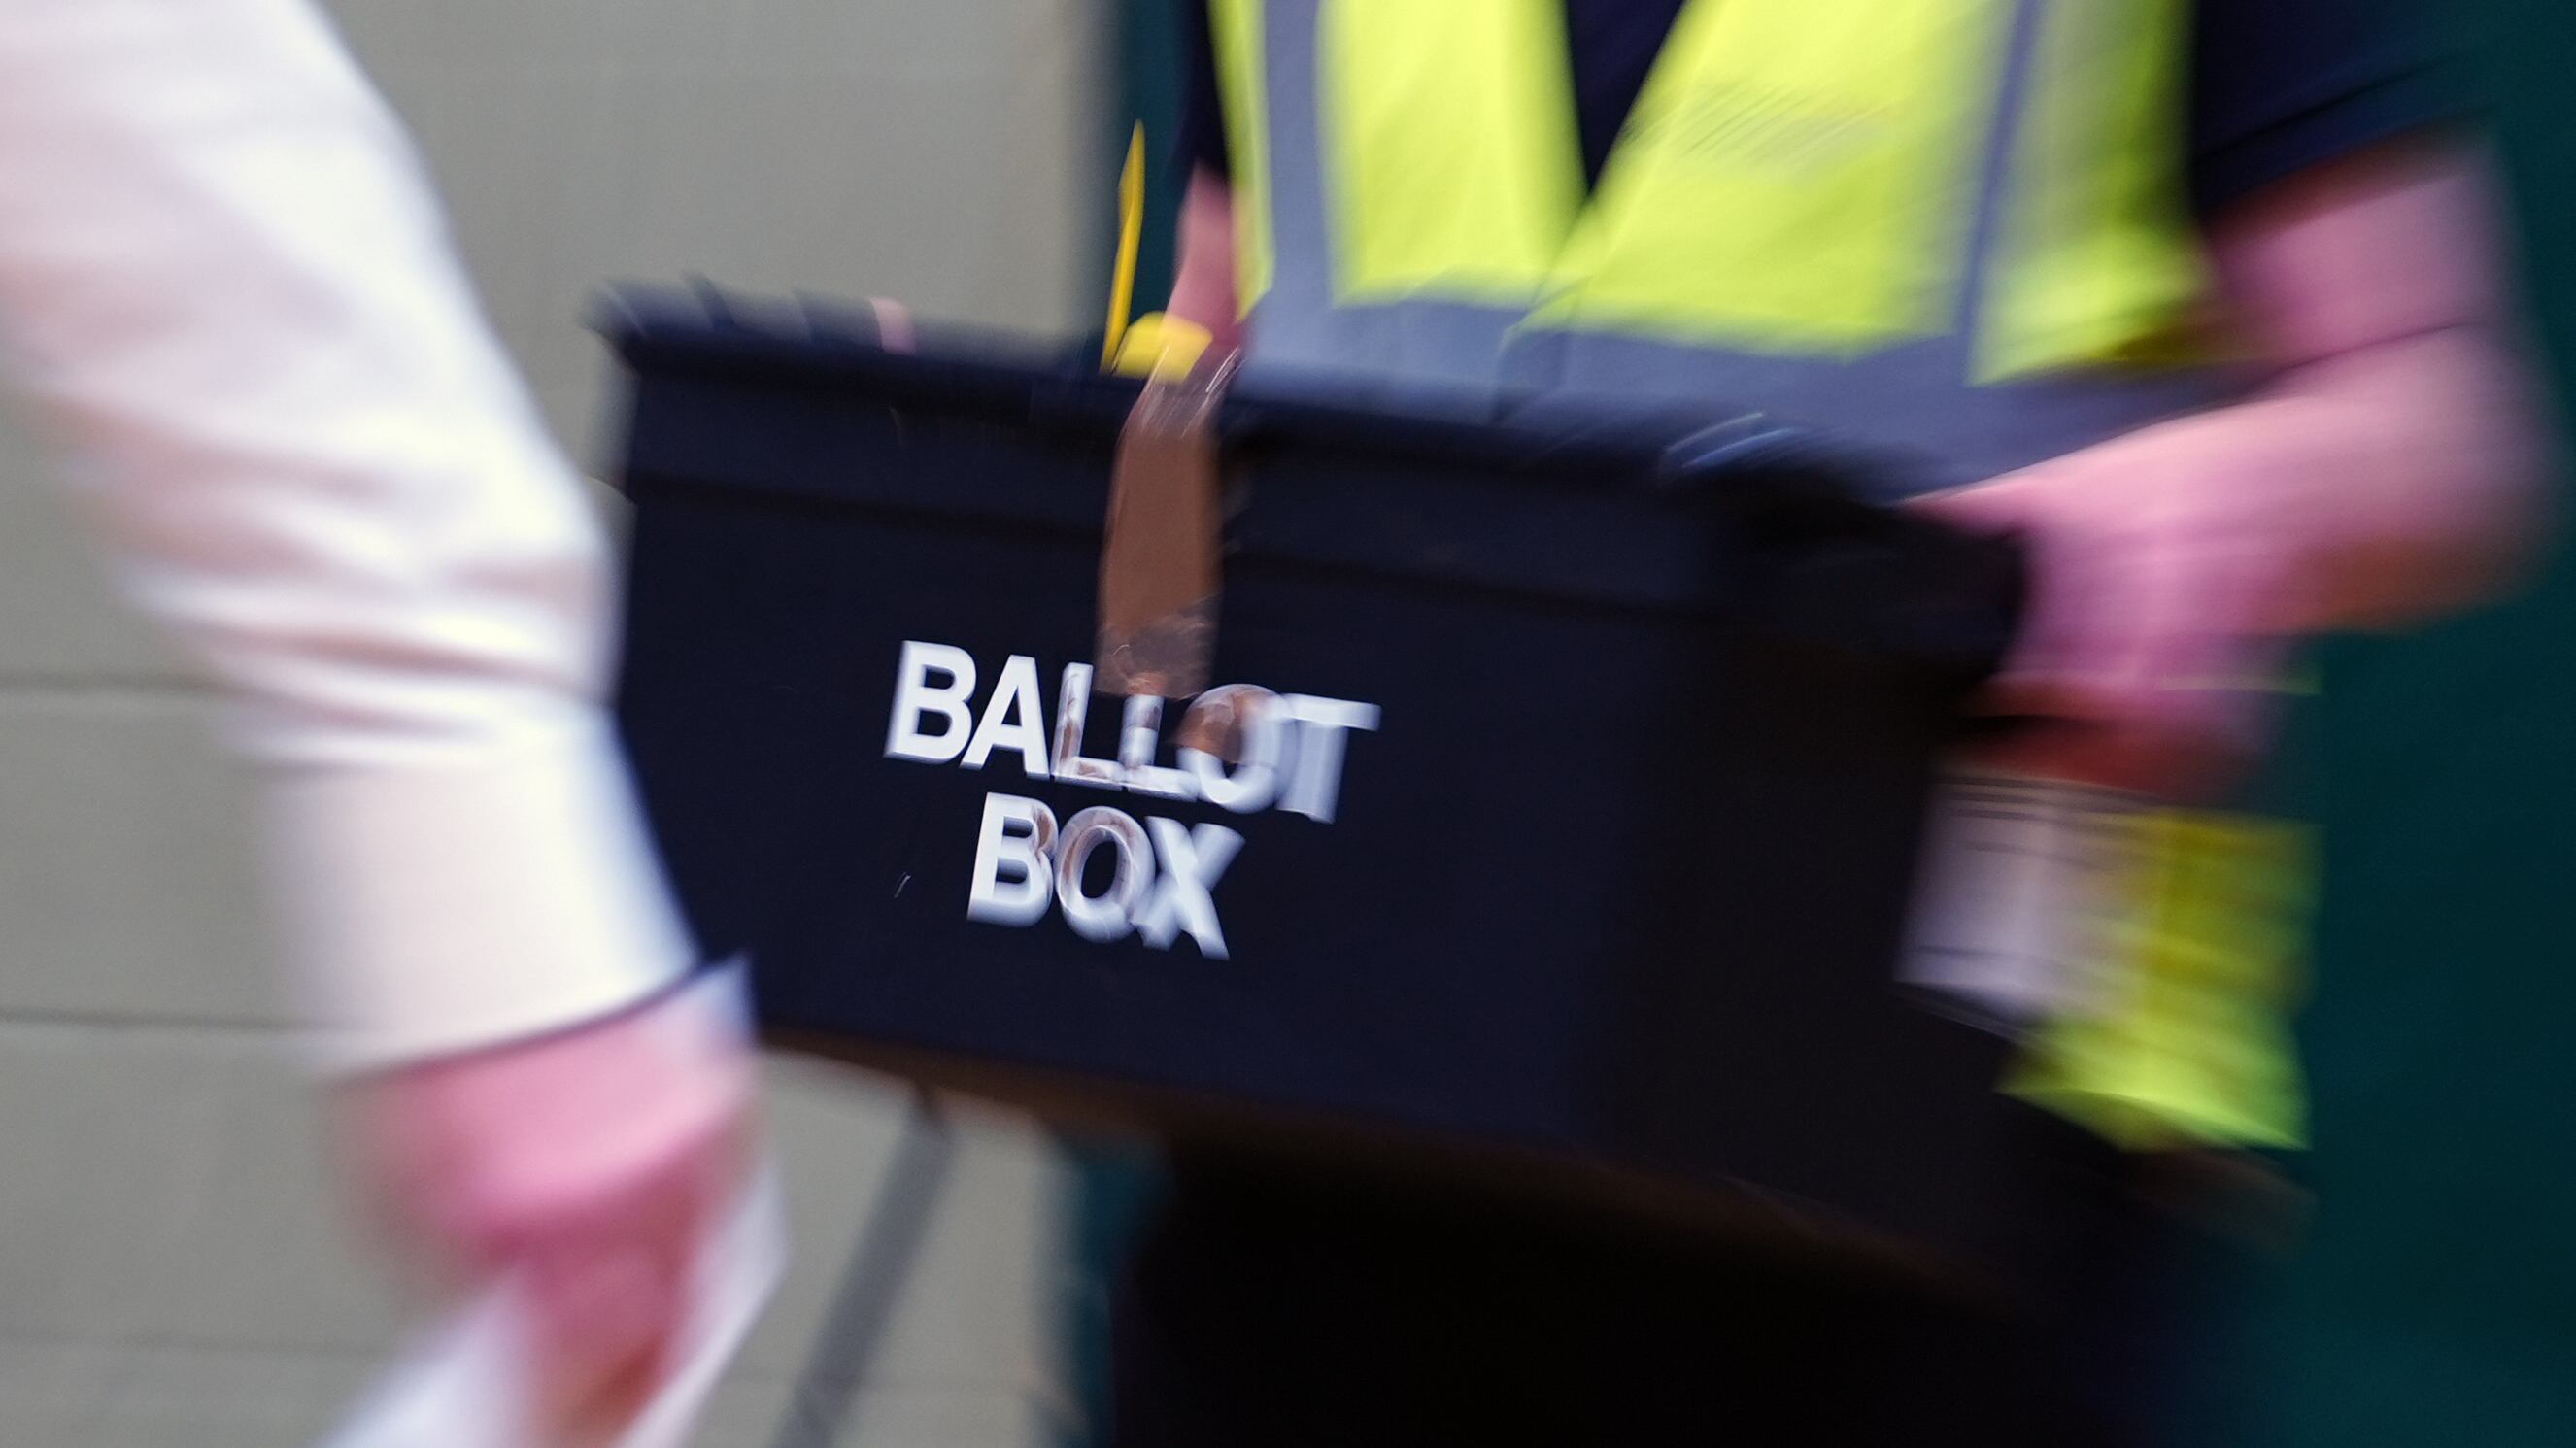 Doubt over the fairness of UK elections is highest among young adults, a new survey suggests